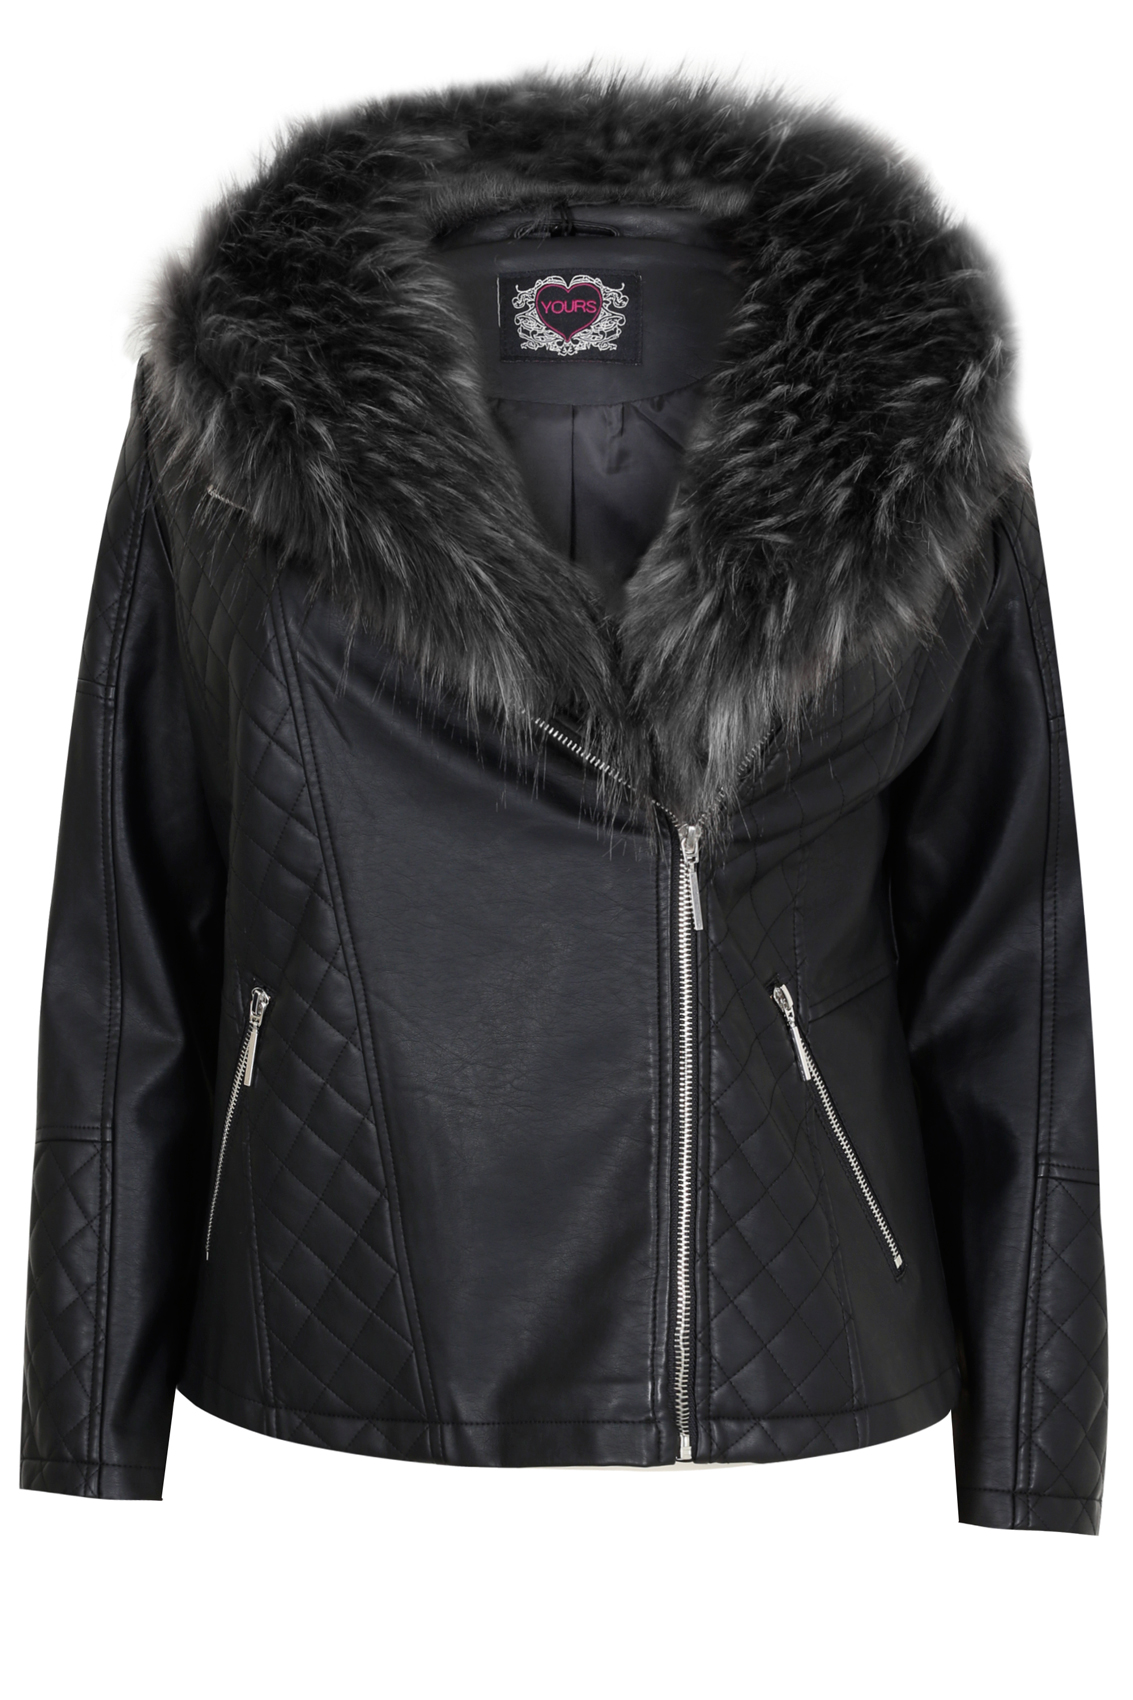 Black Leather Look Jacket With Large Faux Fur Collar Plus size 18,20,22 ...